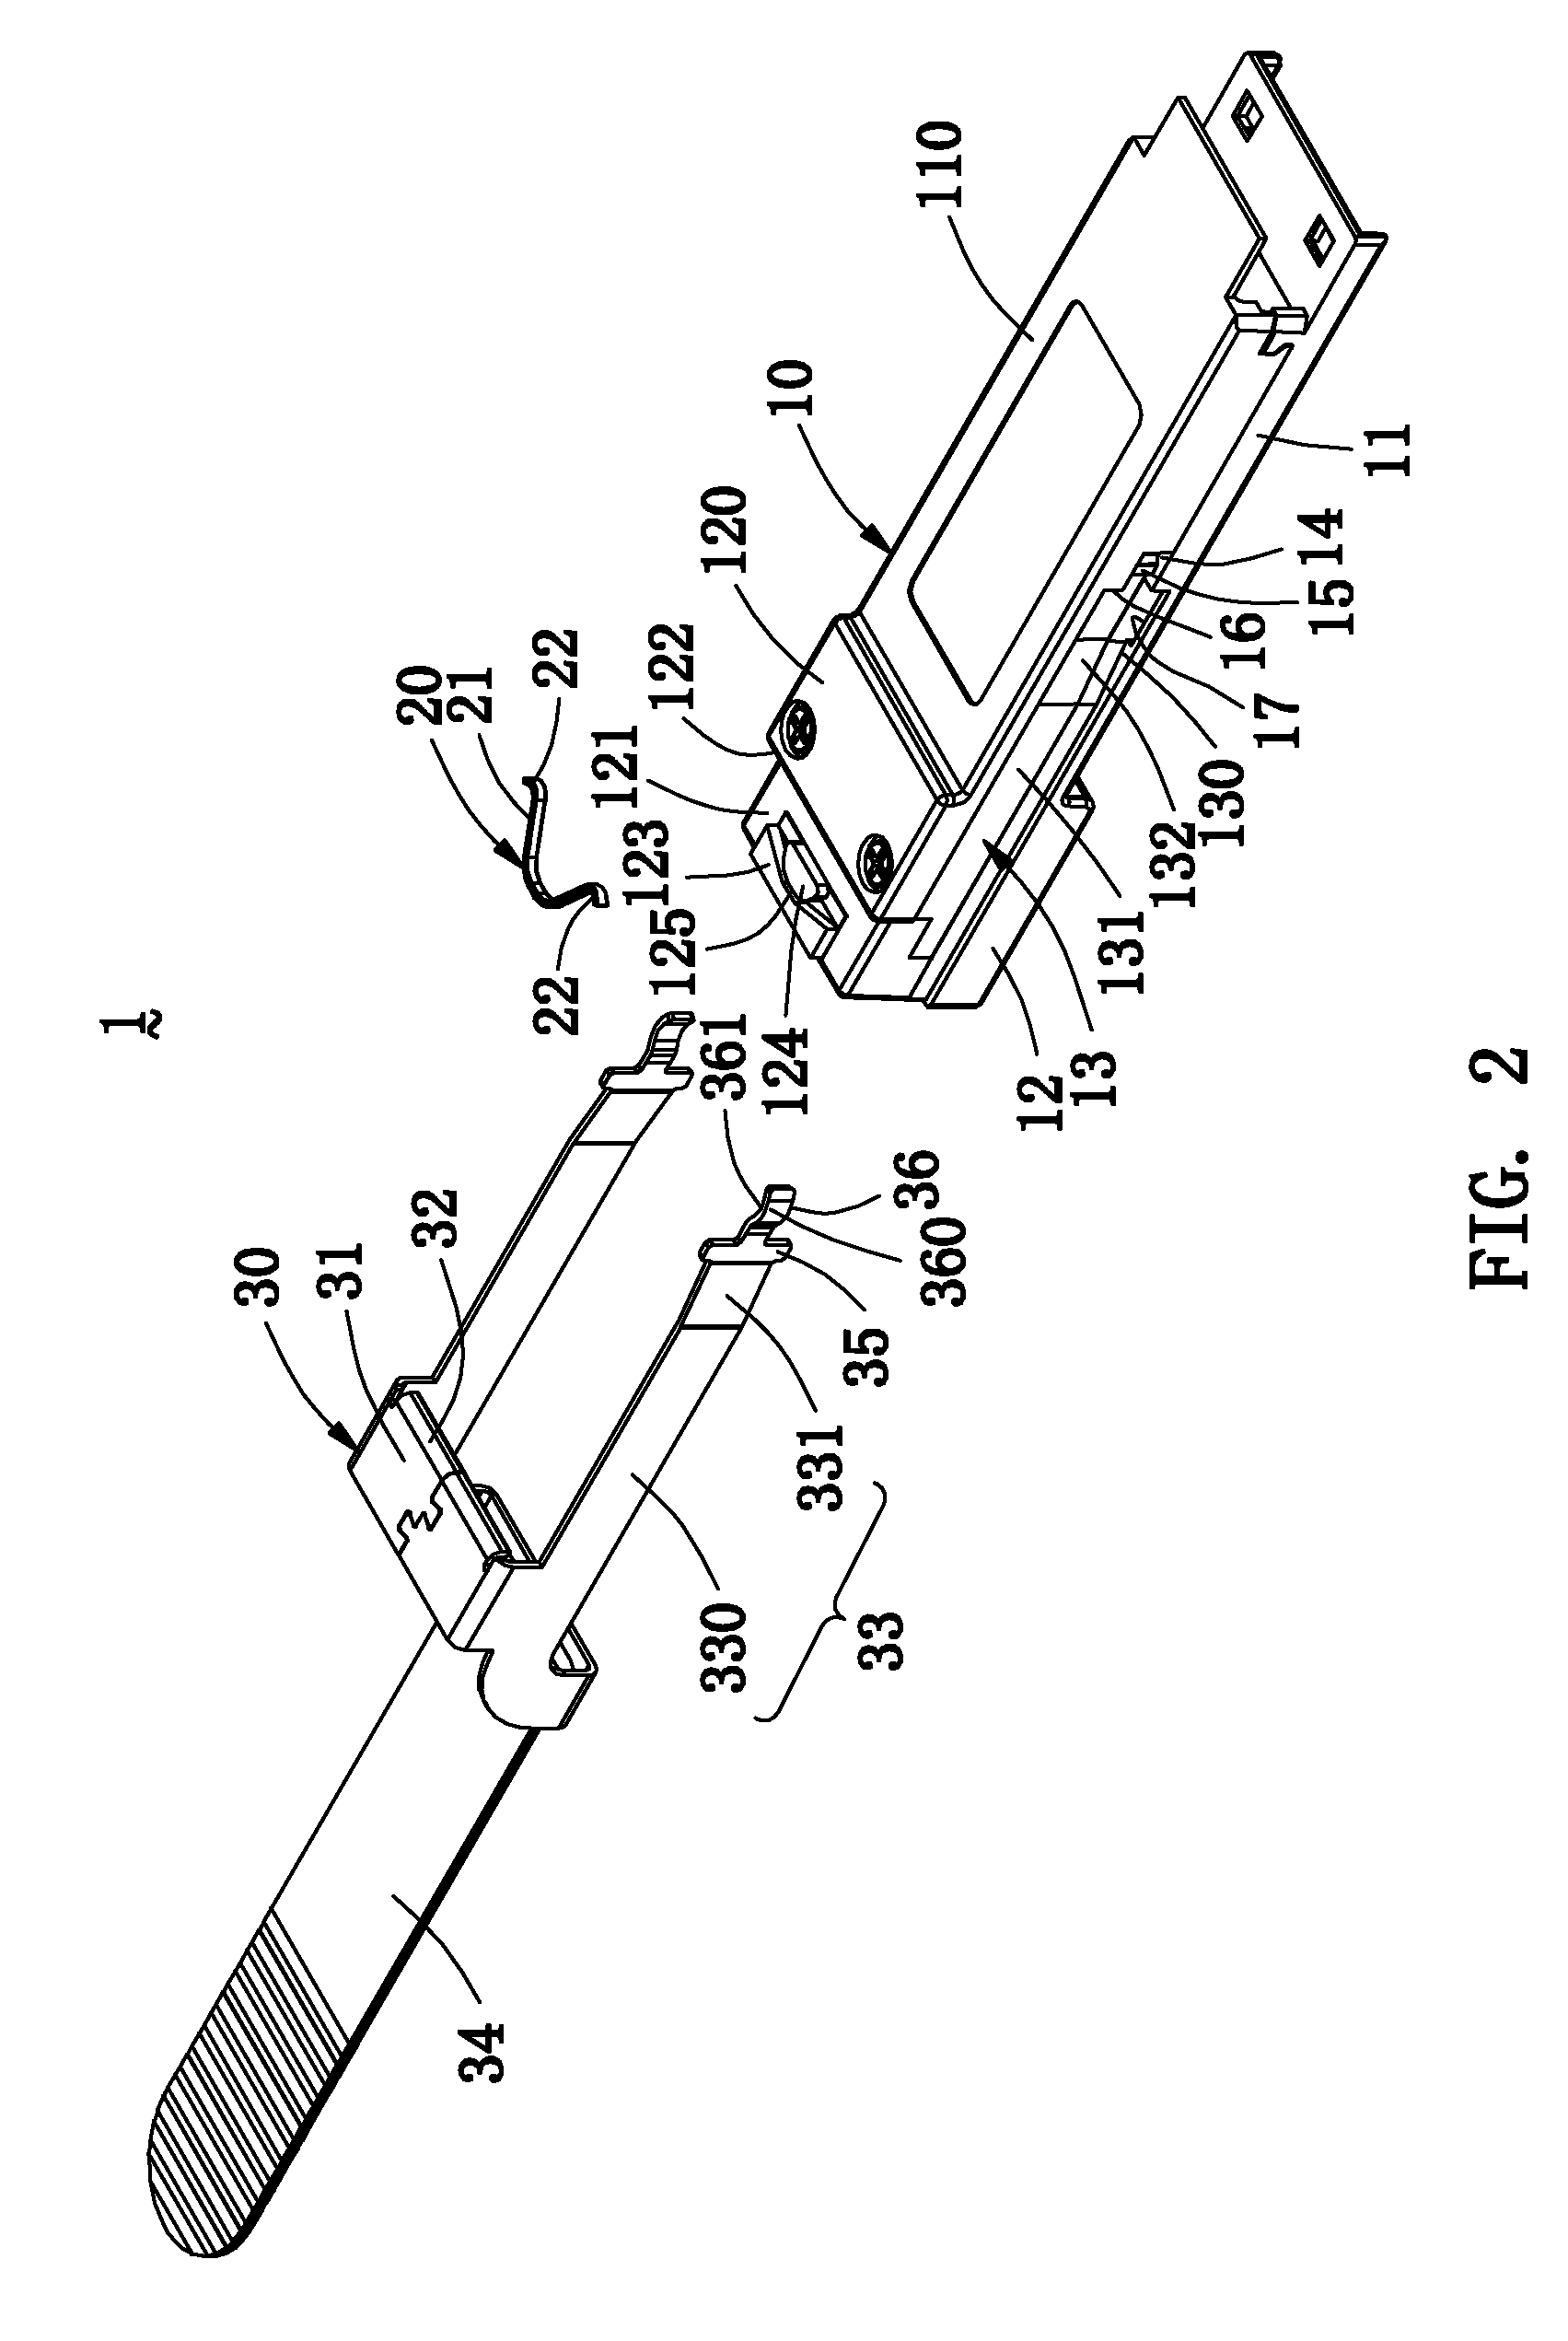 Connector with a locking and unlocking mechanism